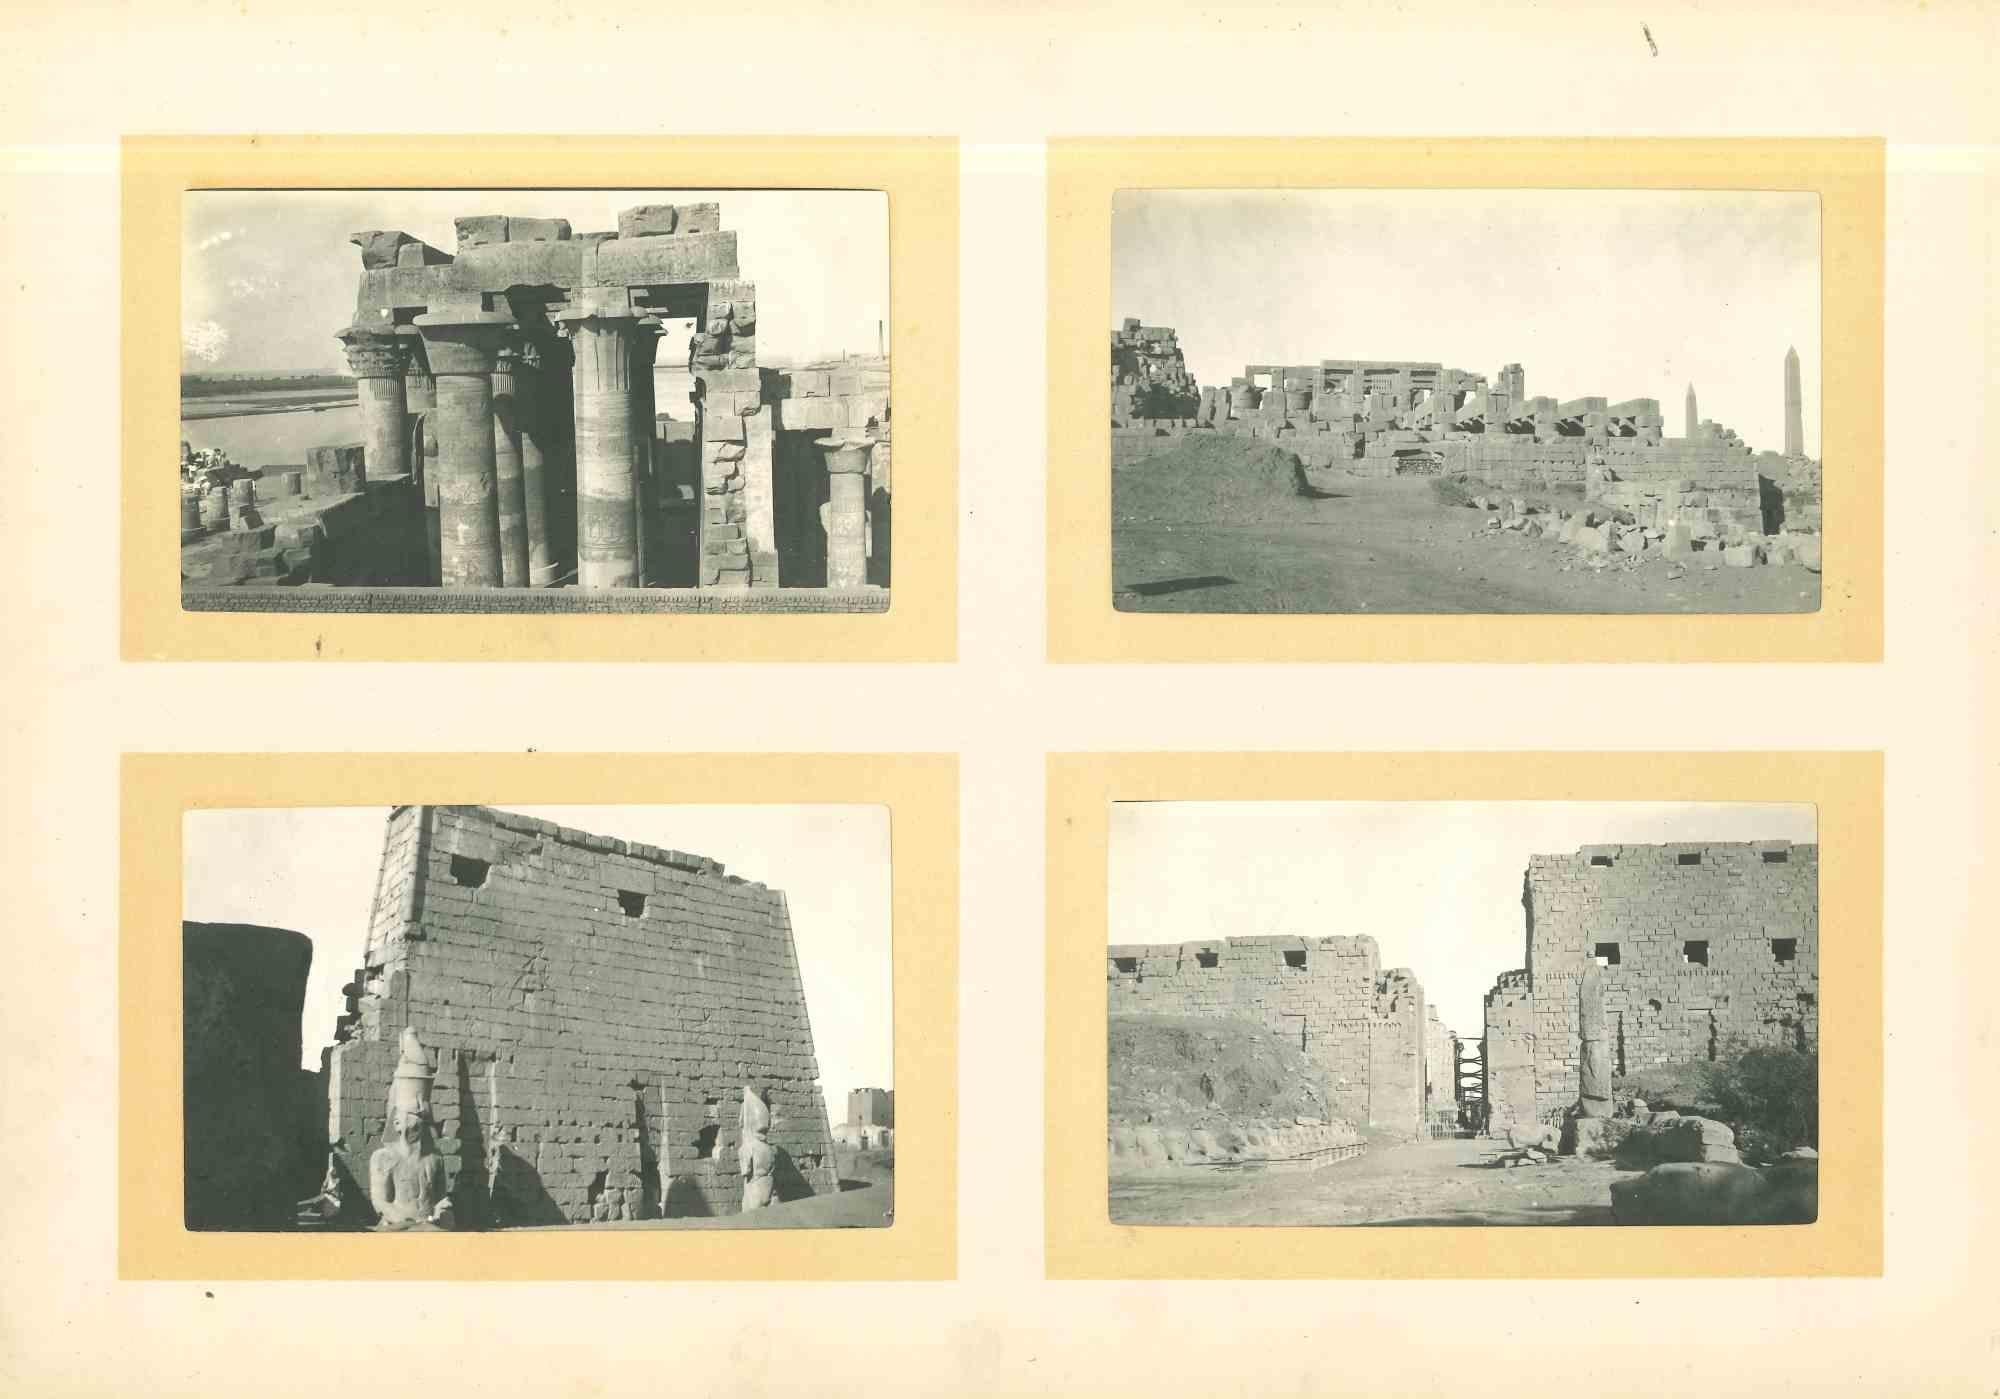 Unknown Figurative Photograph - Views of Egypt - Vintage Photograph - Early 20th Century